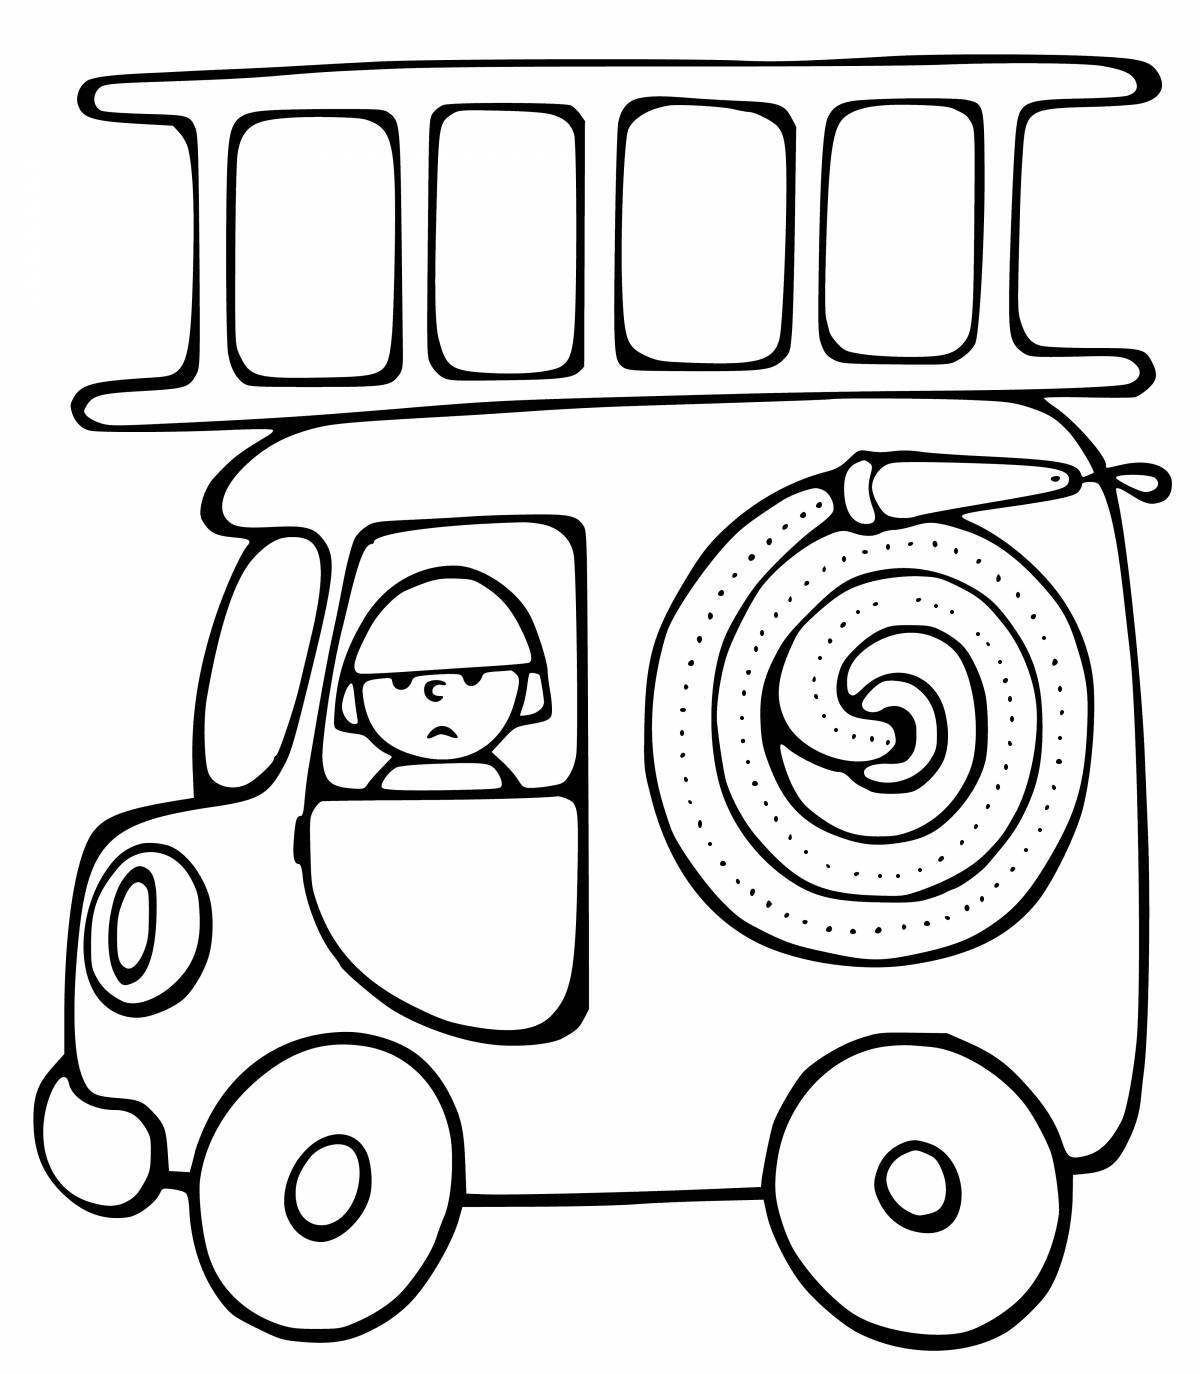 Exciting transport coloring book for 3-4 year olds